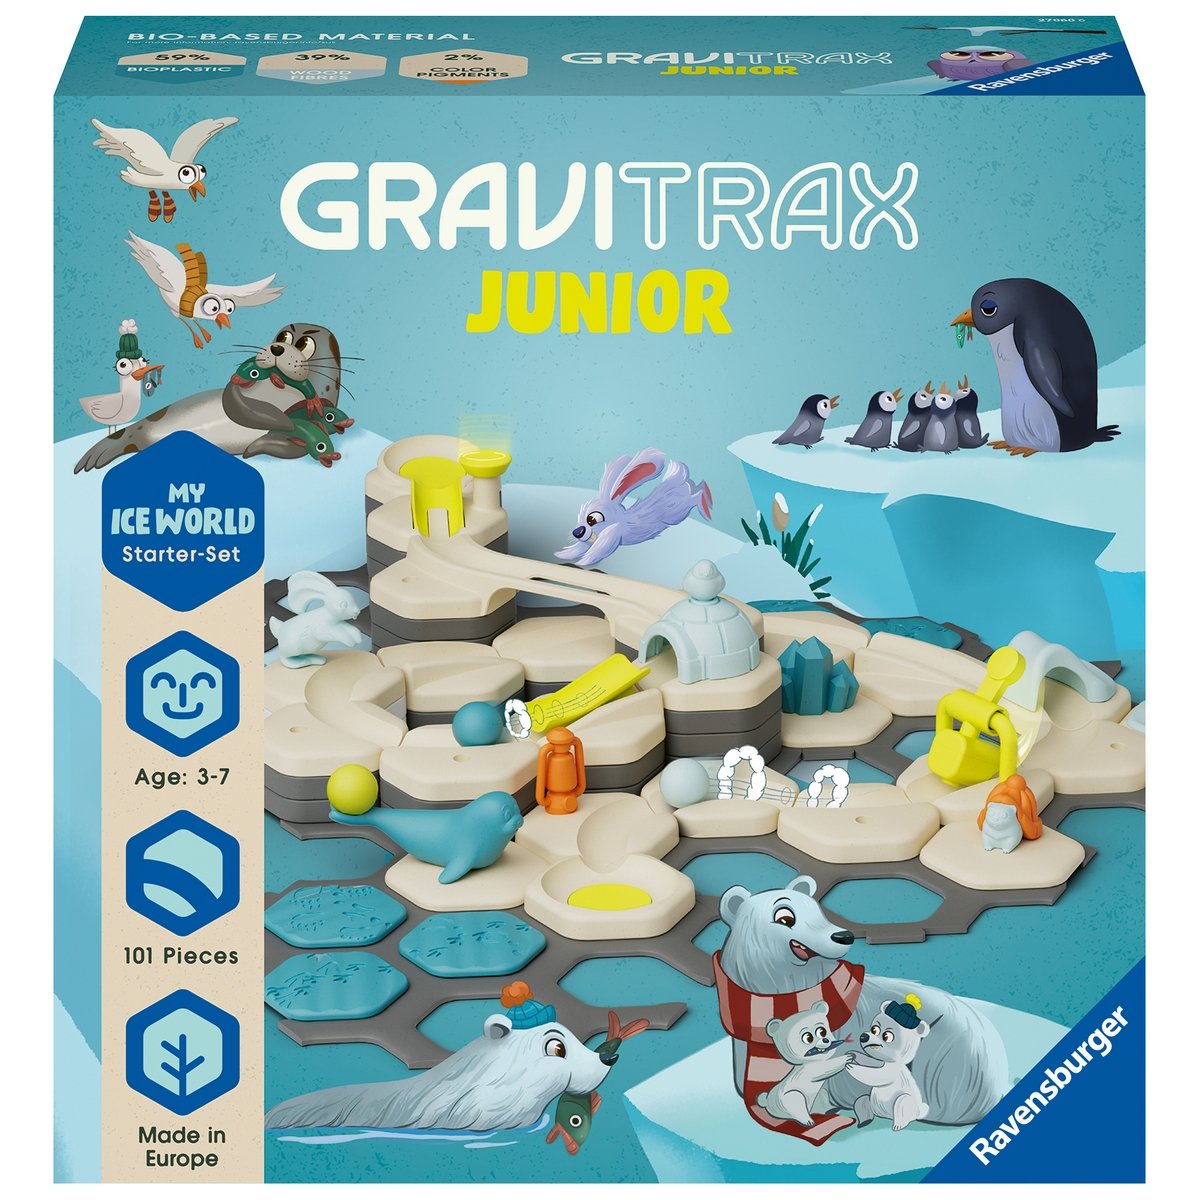 Gravitrax jeu parcours - Brault & Bouthillier